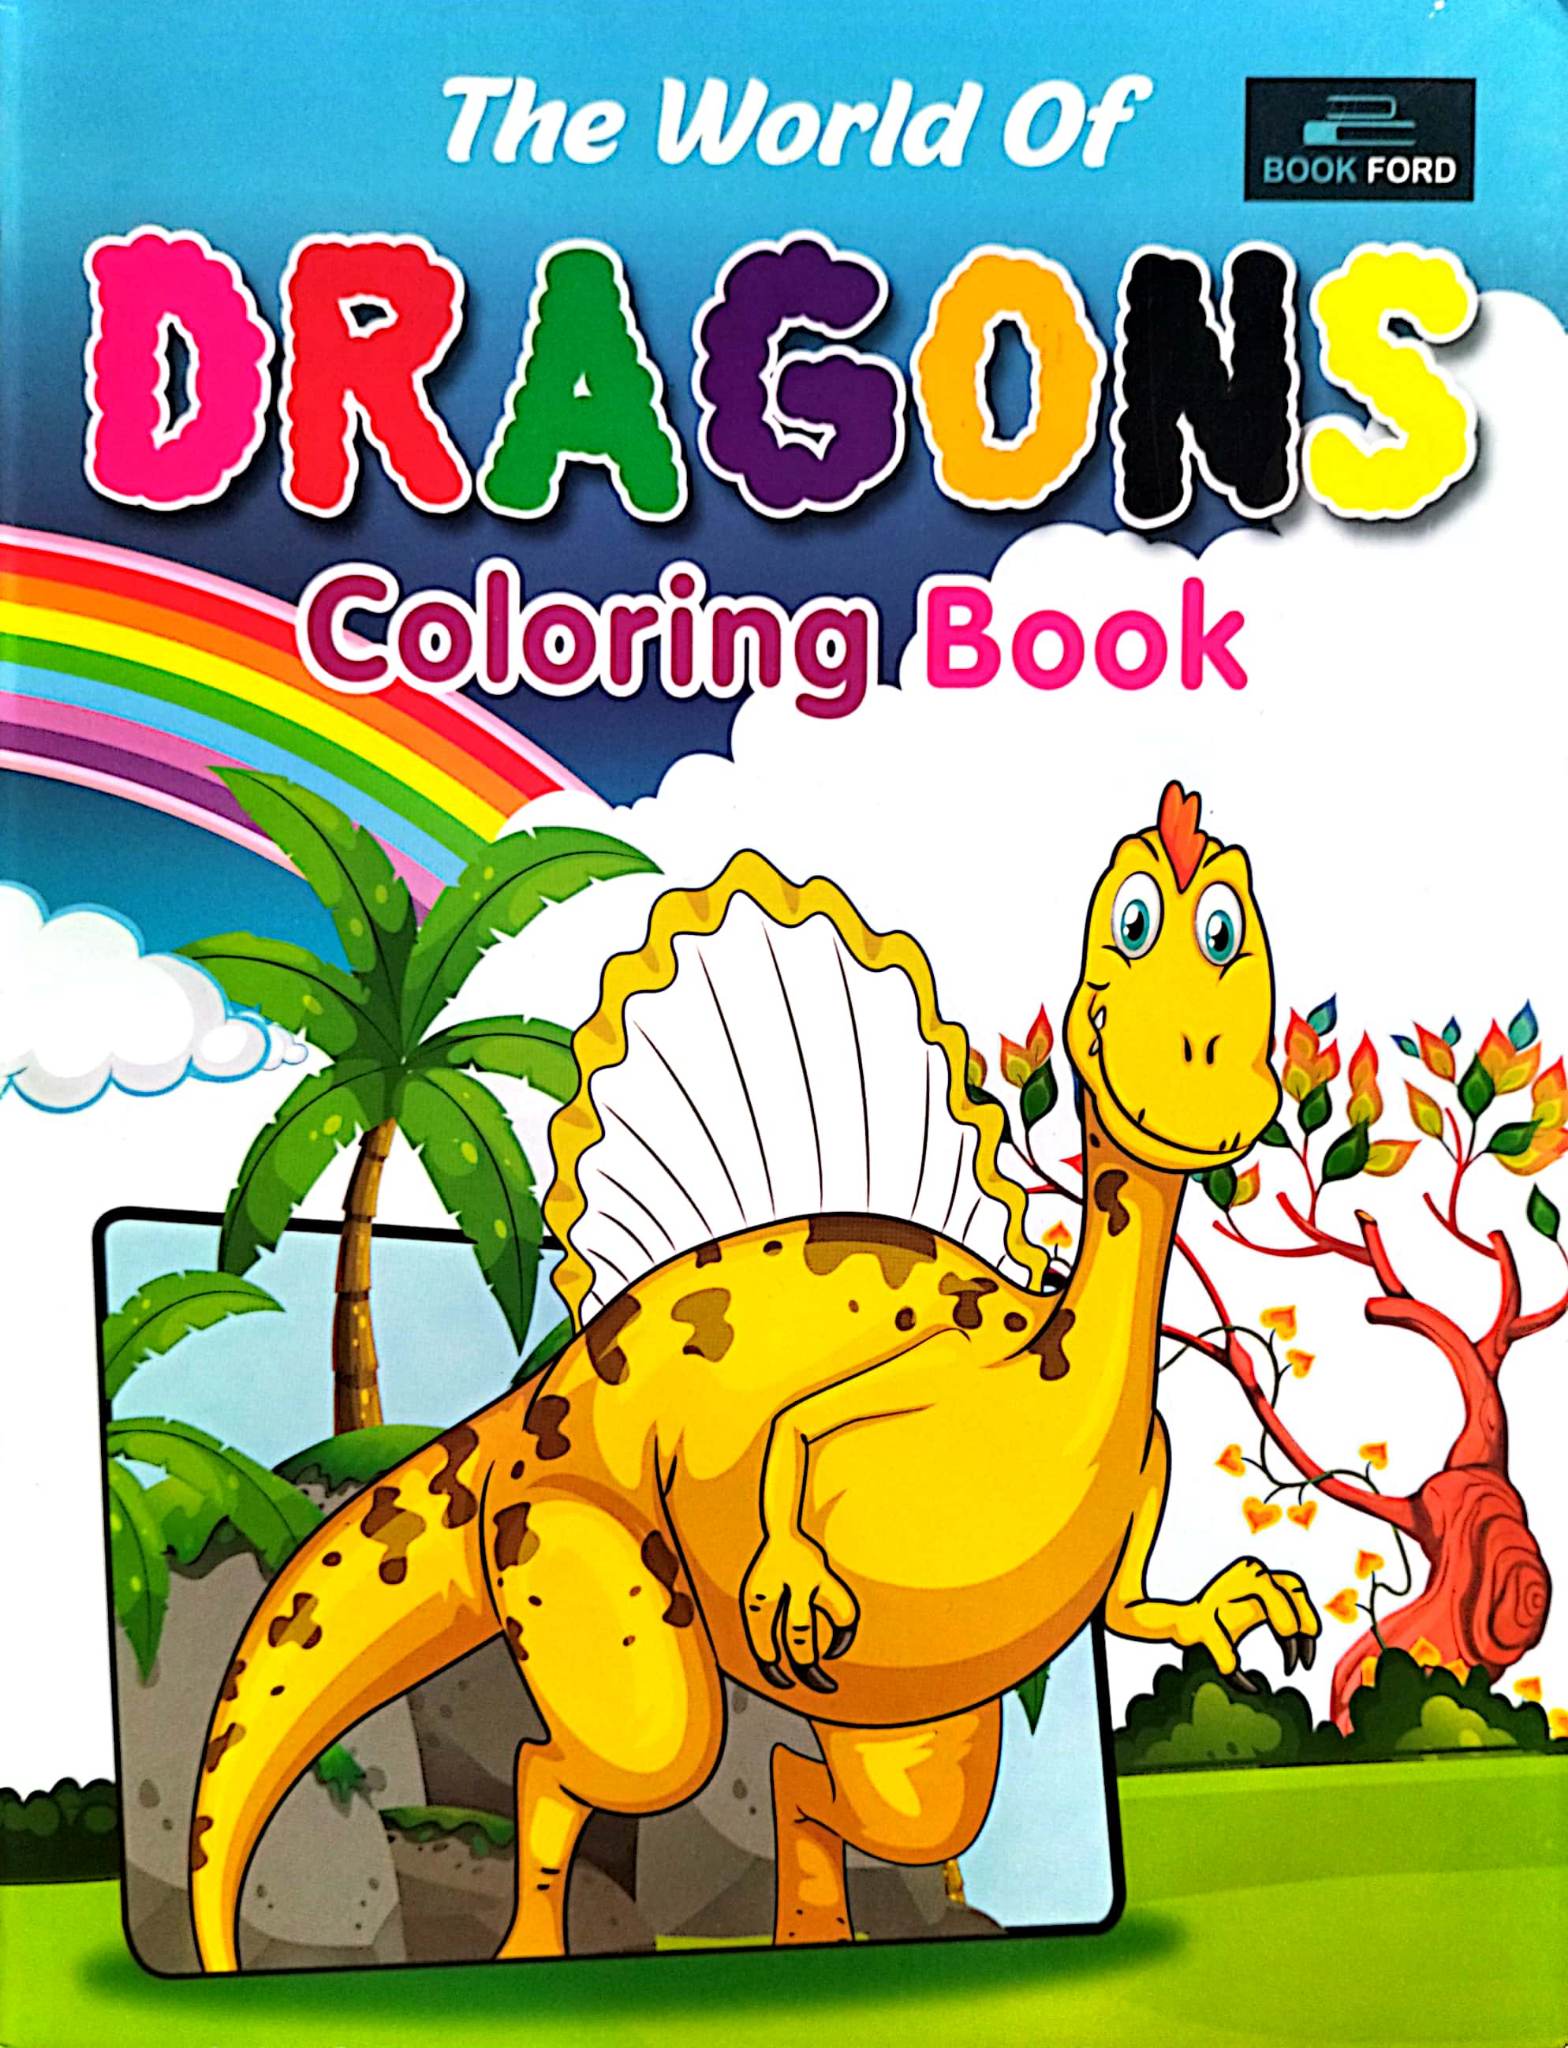 The World of Dragons Coloring Book (পেপারব্যাক)